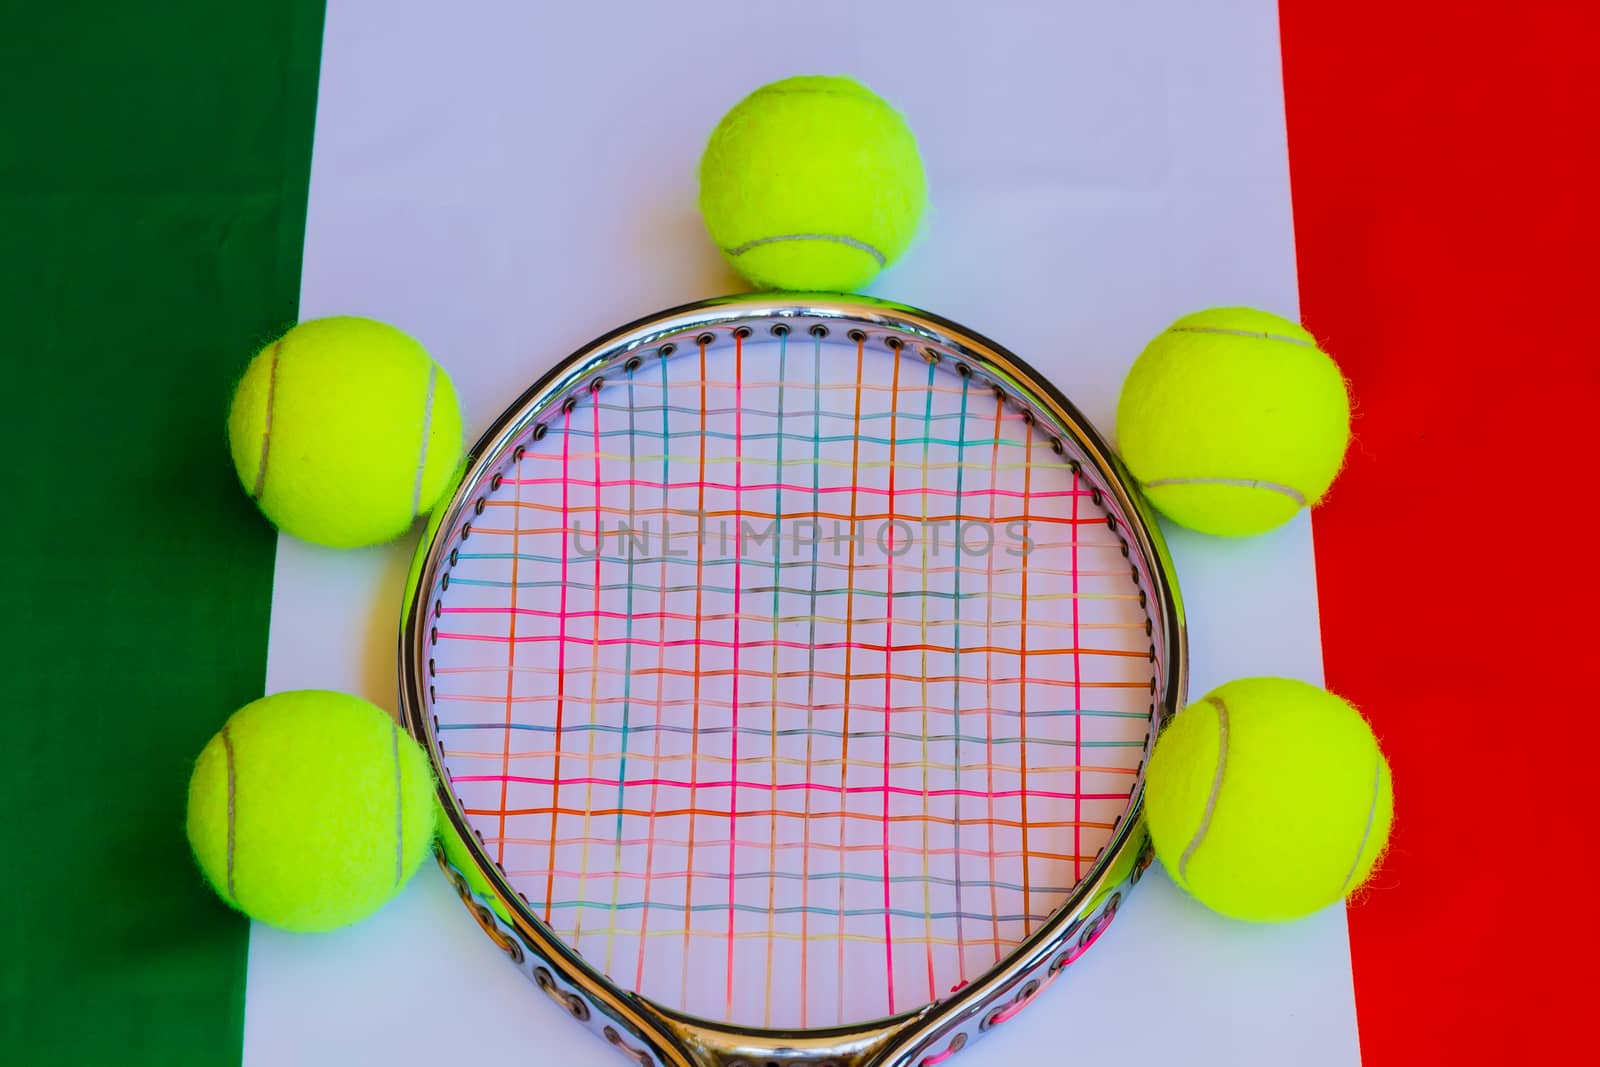 Tennis racket in metal with colored ropes and yellow tennis balls with the italian flag in the background